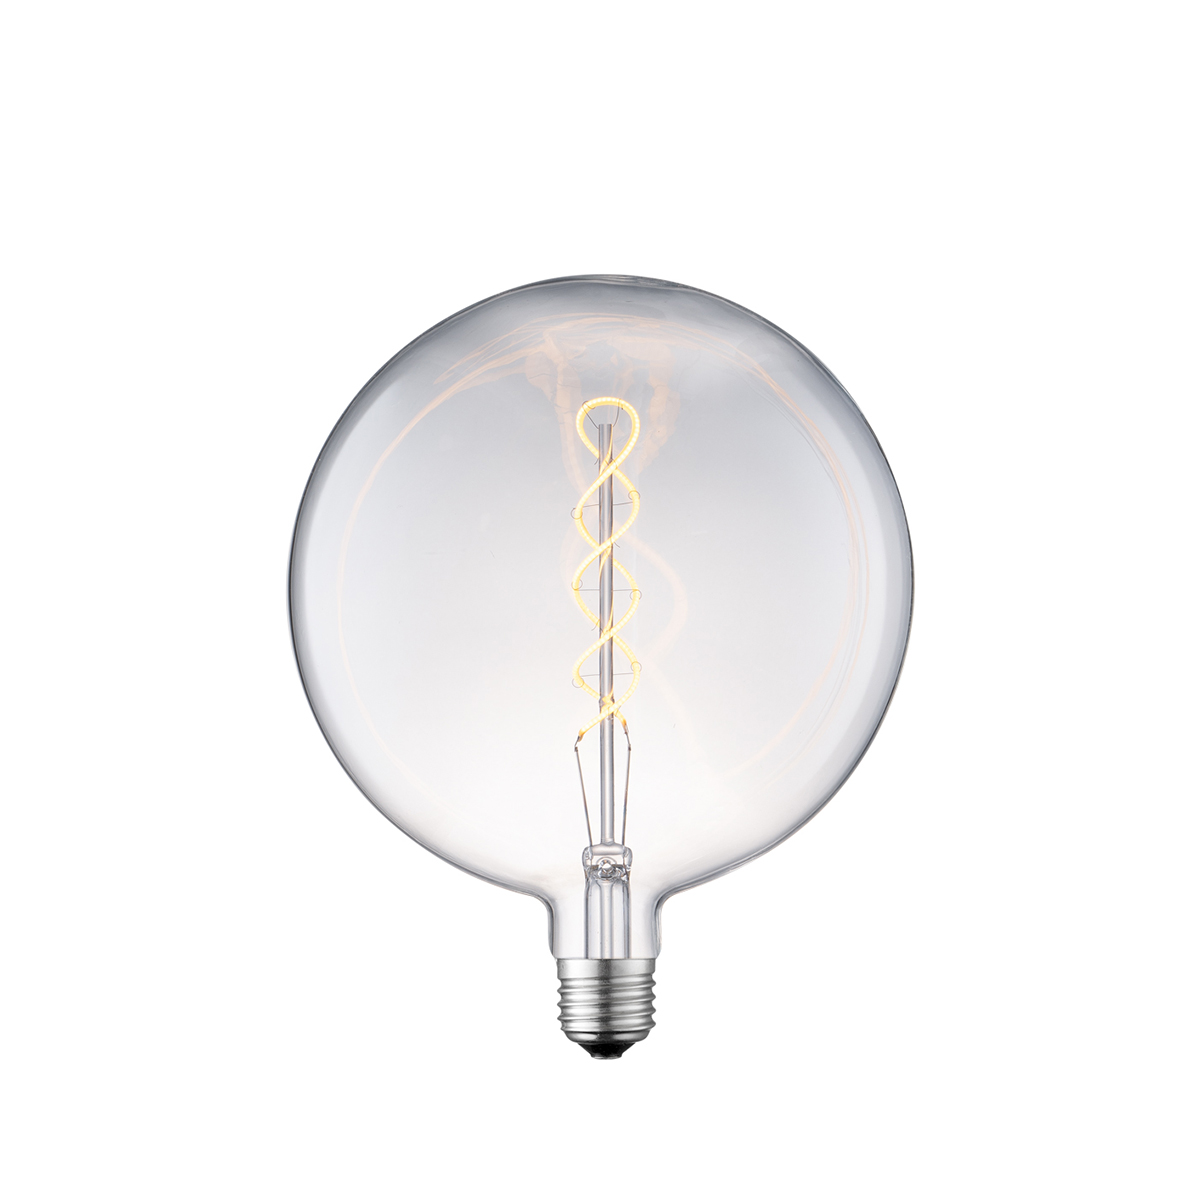 Tangla lighting - TLB-8012-04CL - LED Light Bulb Double Spiral filament - G150 4W clear - medium - dimmable - E27